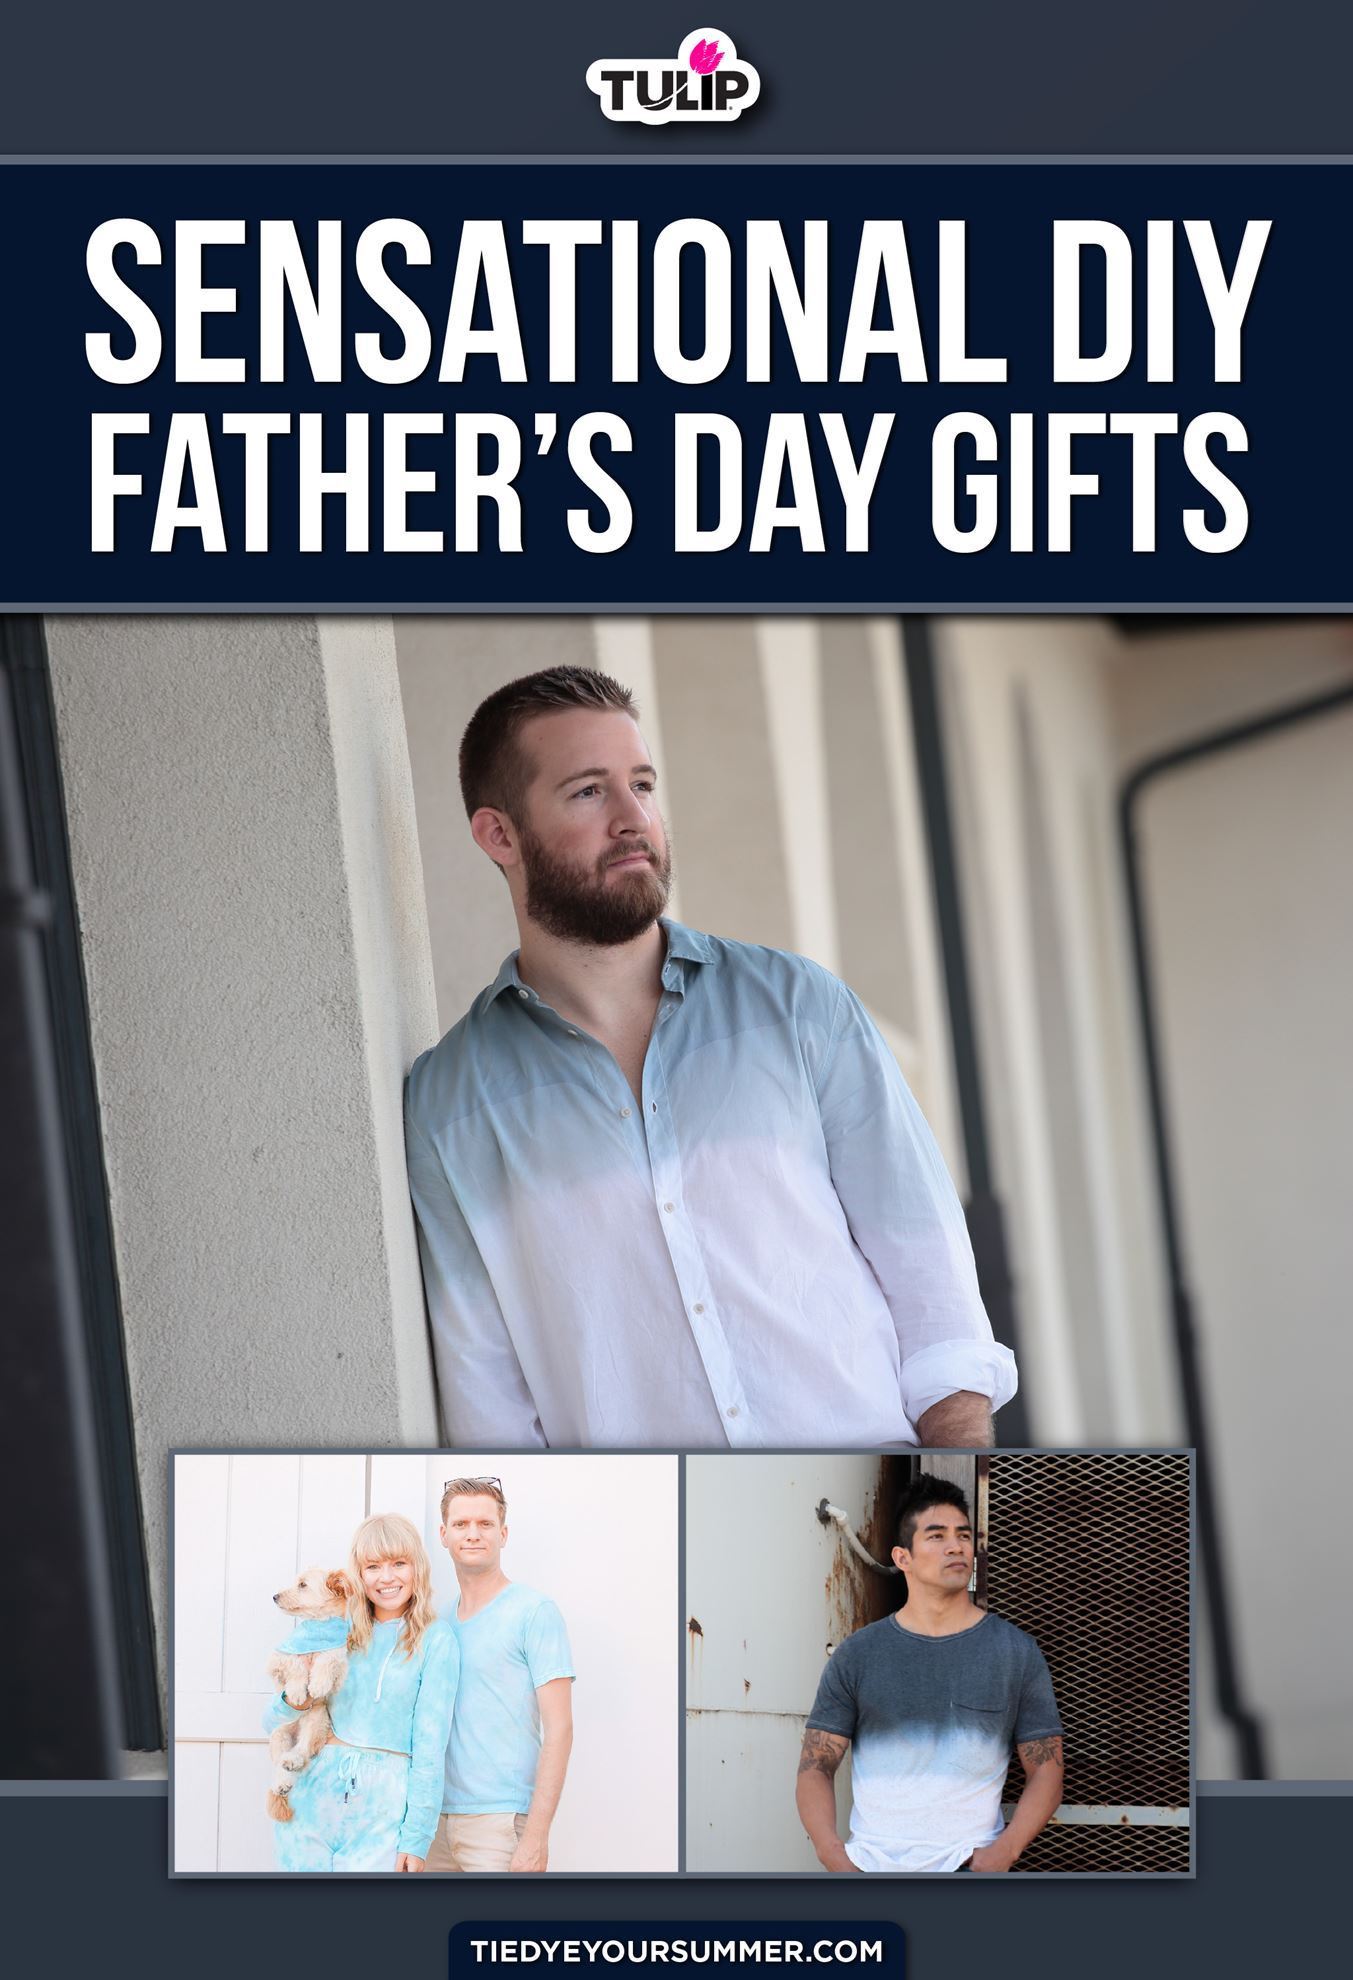 6 Sensational DIY Father’s Day Gifts with Tie Dye